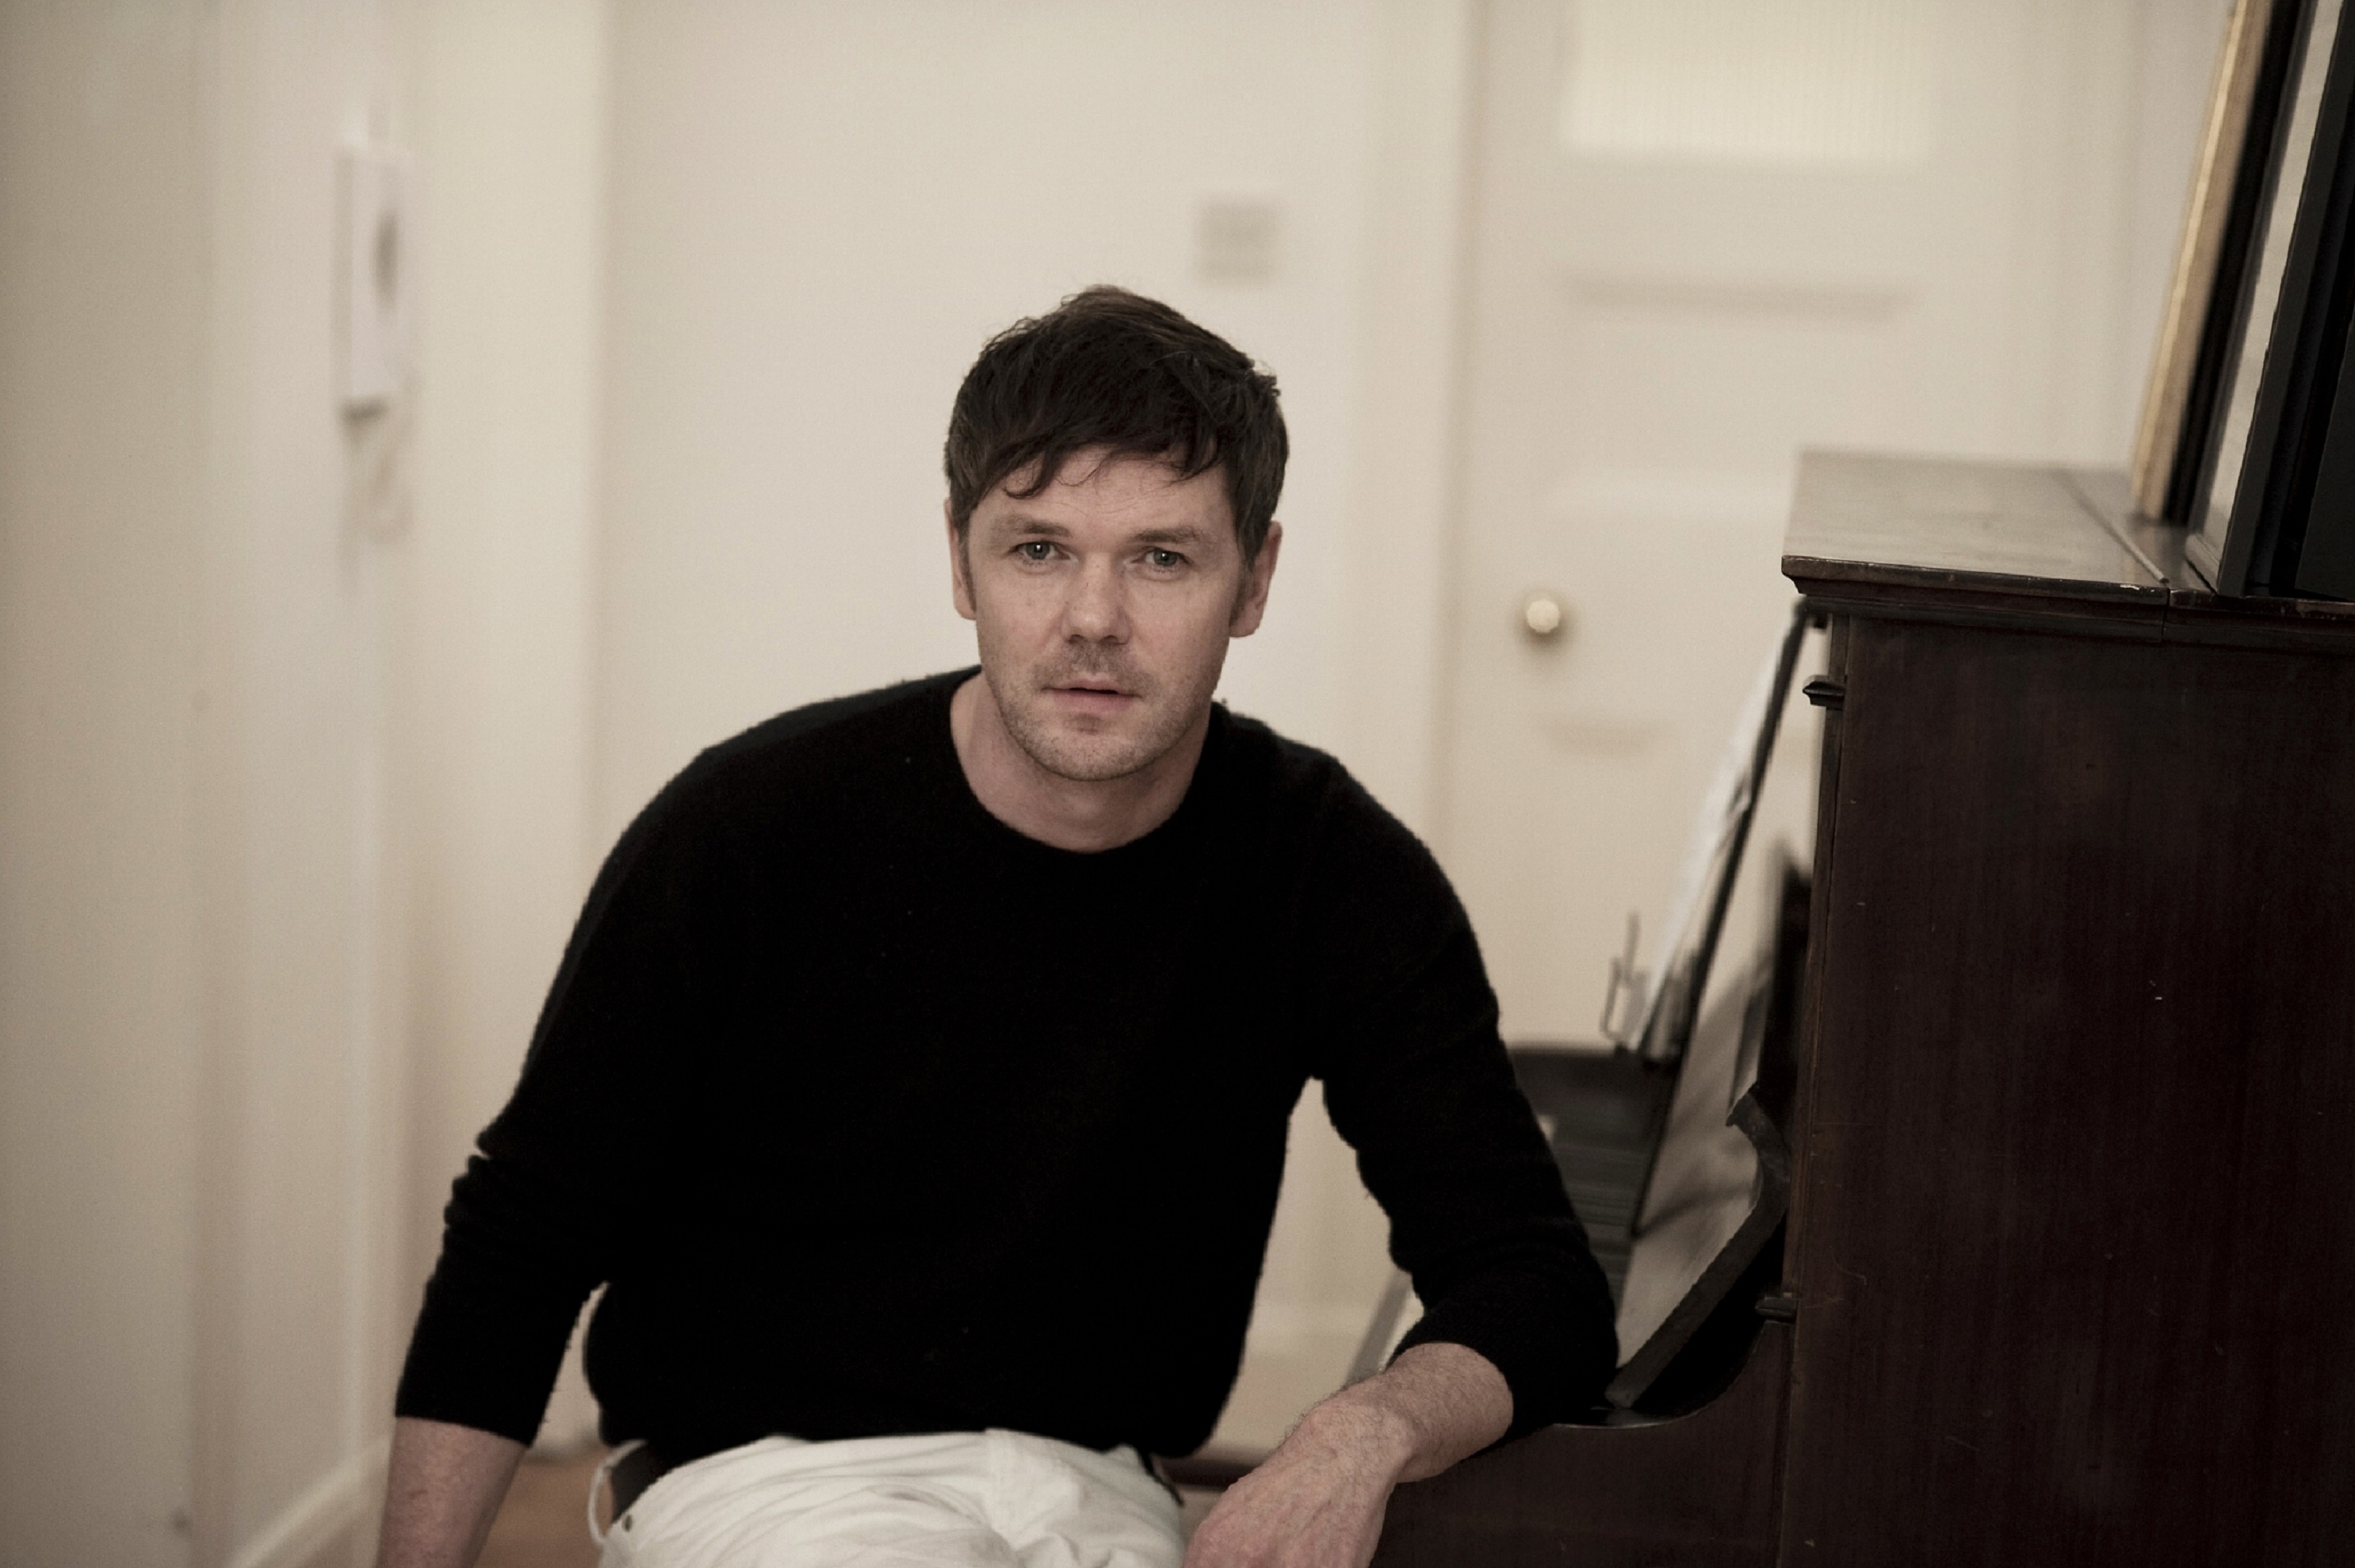 Roddy Woomble will hit the stage at the award-winning Stornoway festival next month